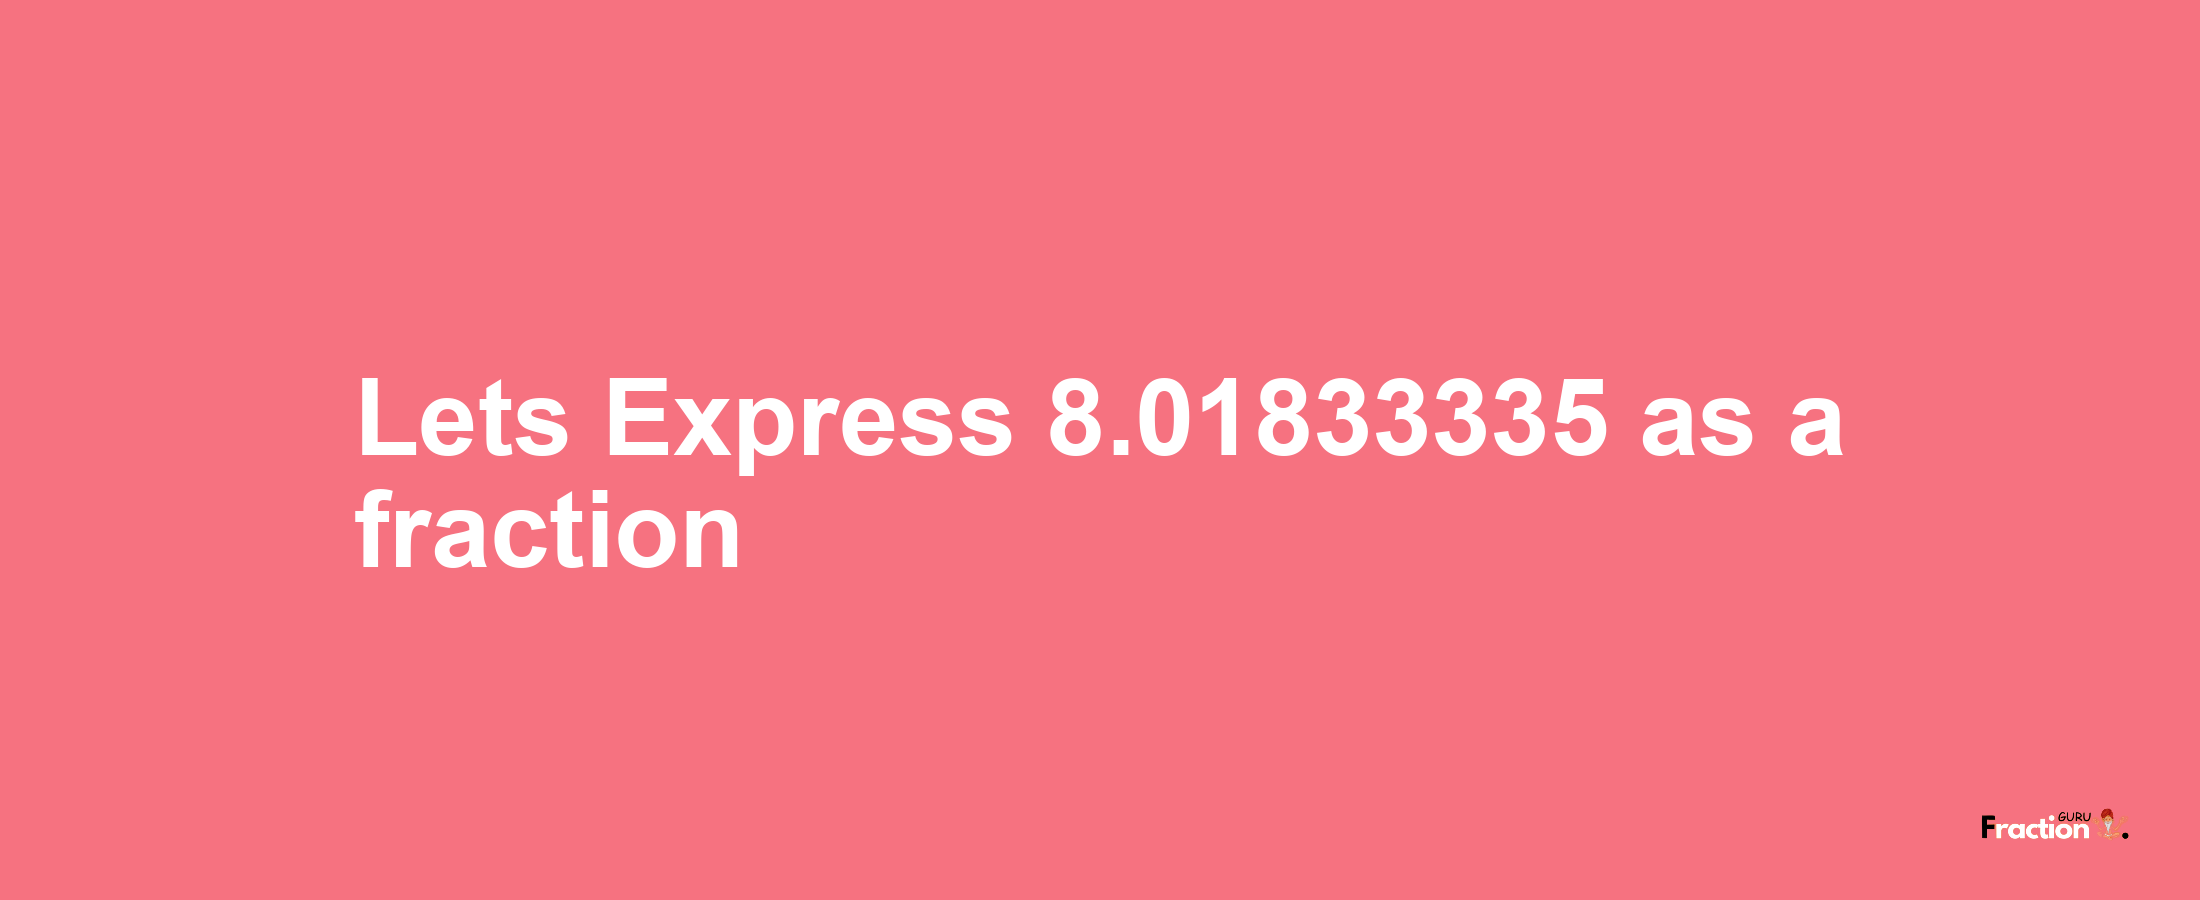 Lets Express 8.01833335 as afraction